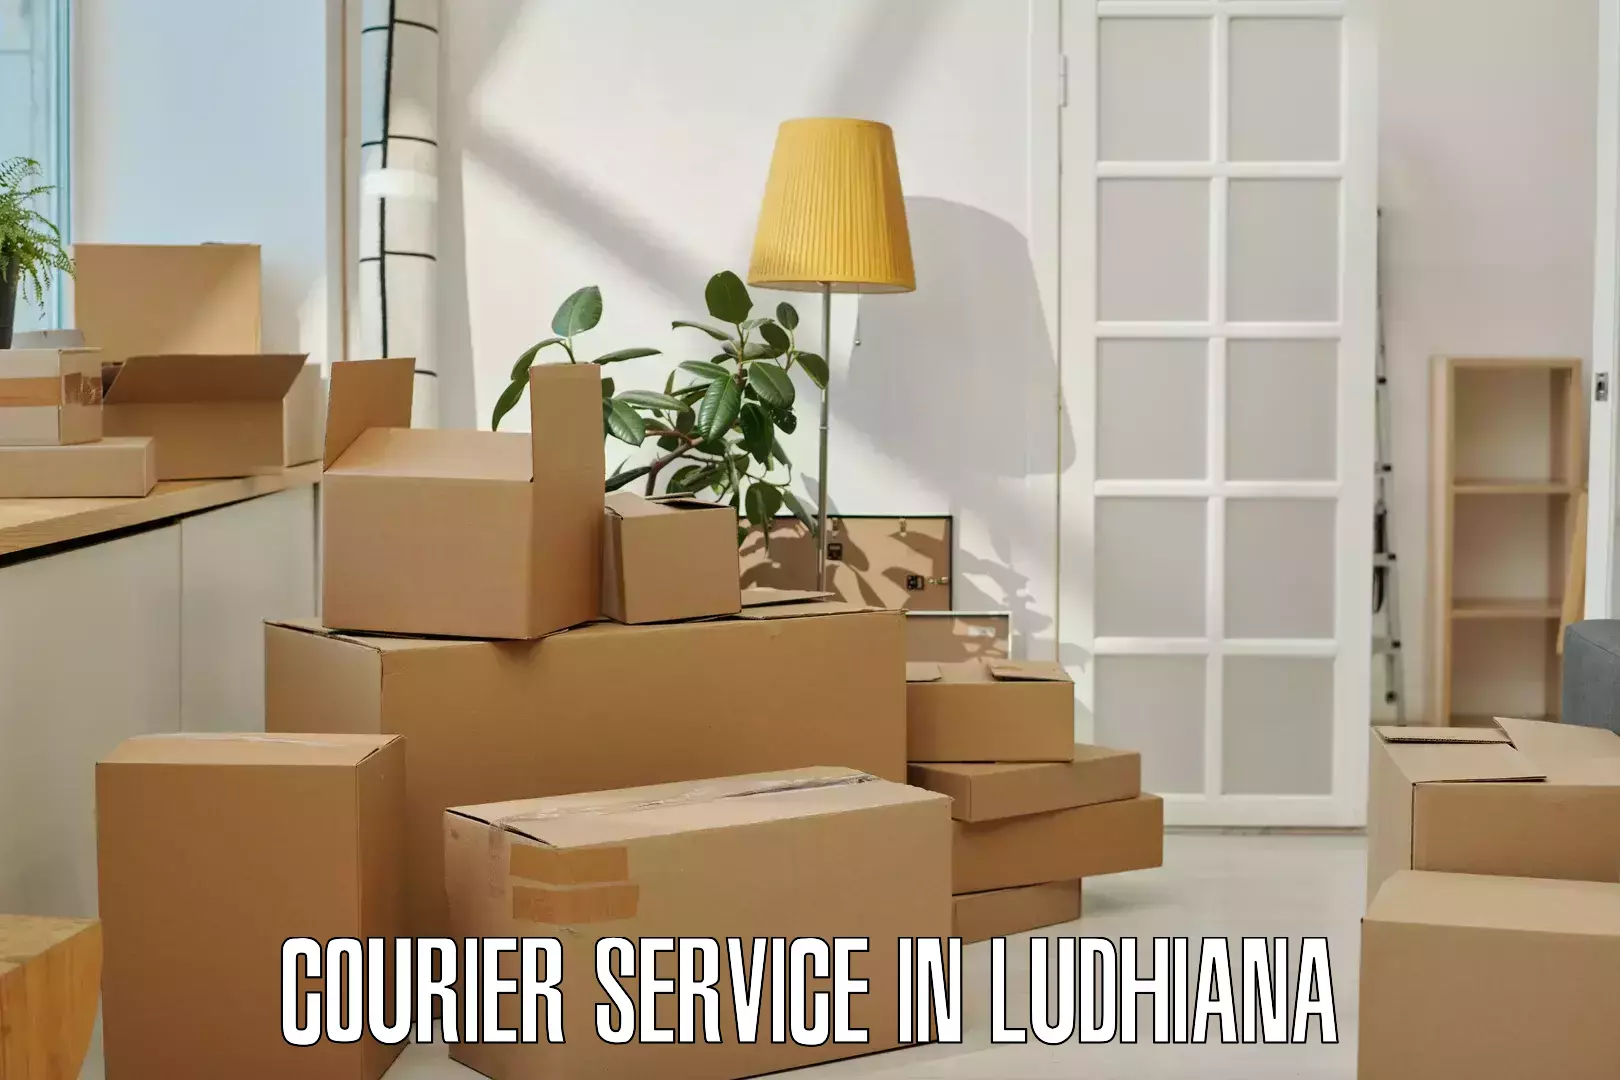 Enhanced delivery experience in Ludhiana